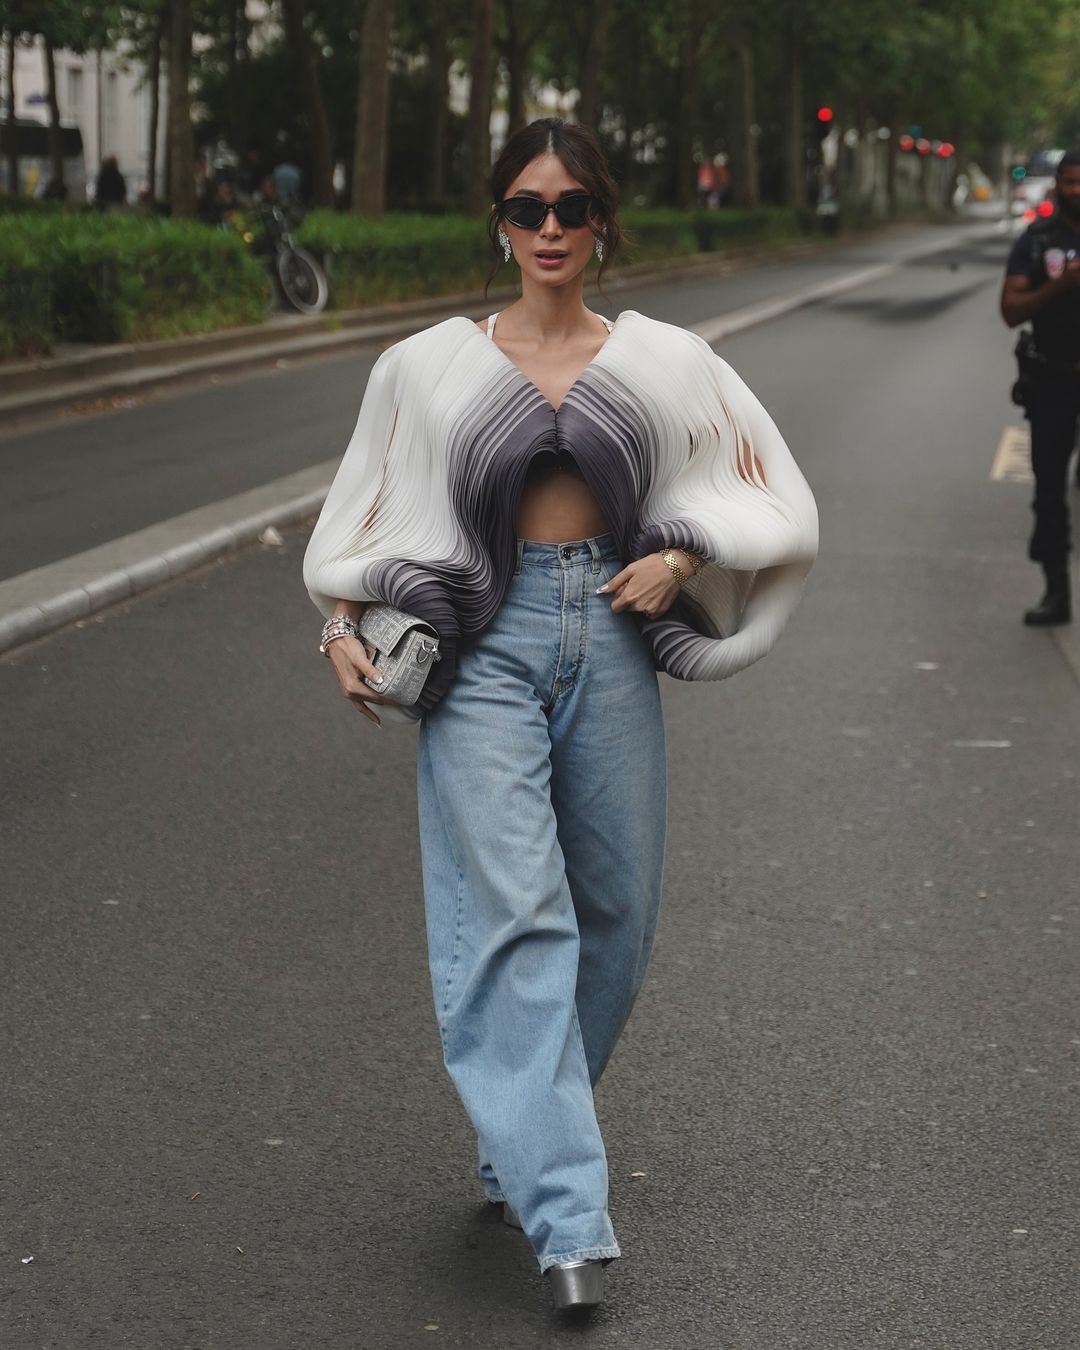 Shop from the Same Filipino-Made Collection that Heart Evangelista Wore at Paris Fashion Week